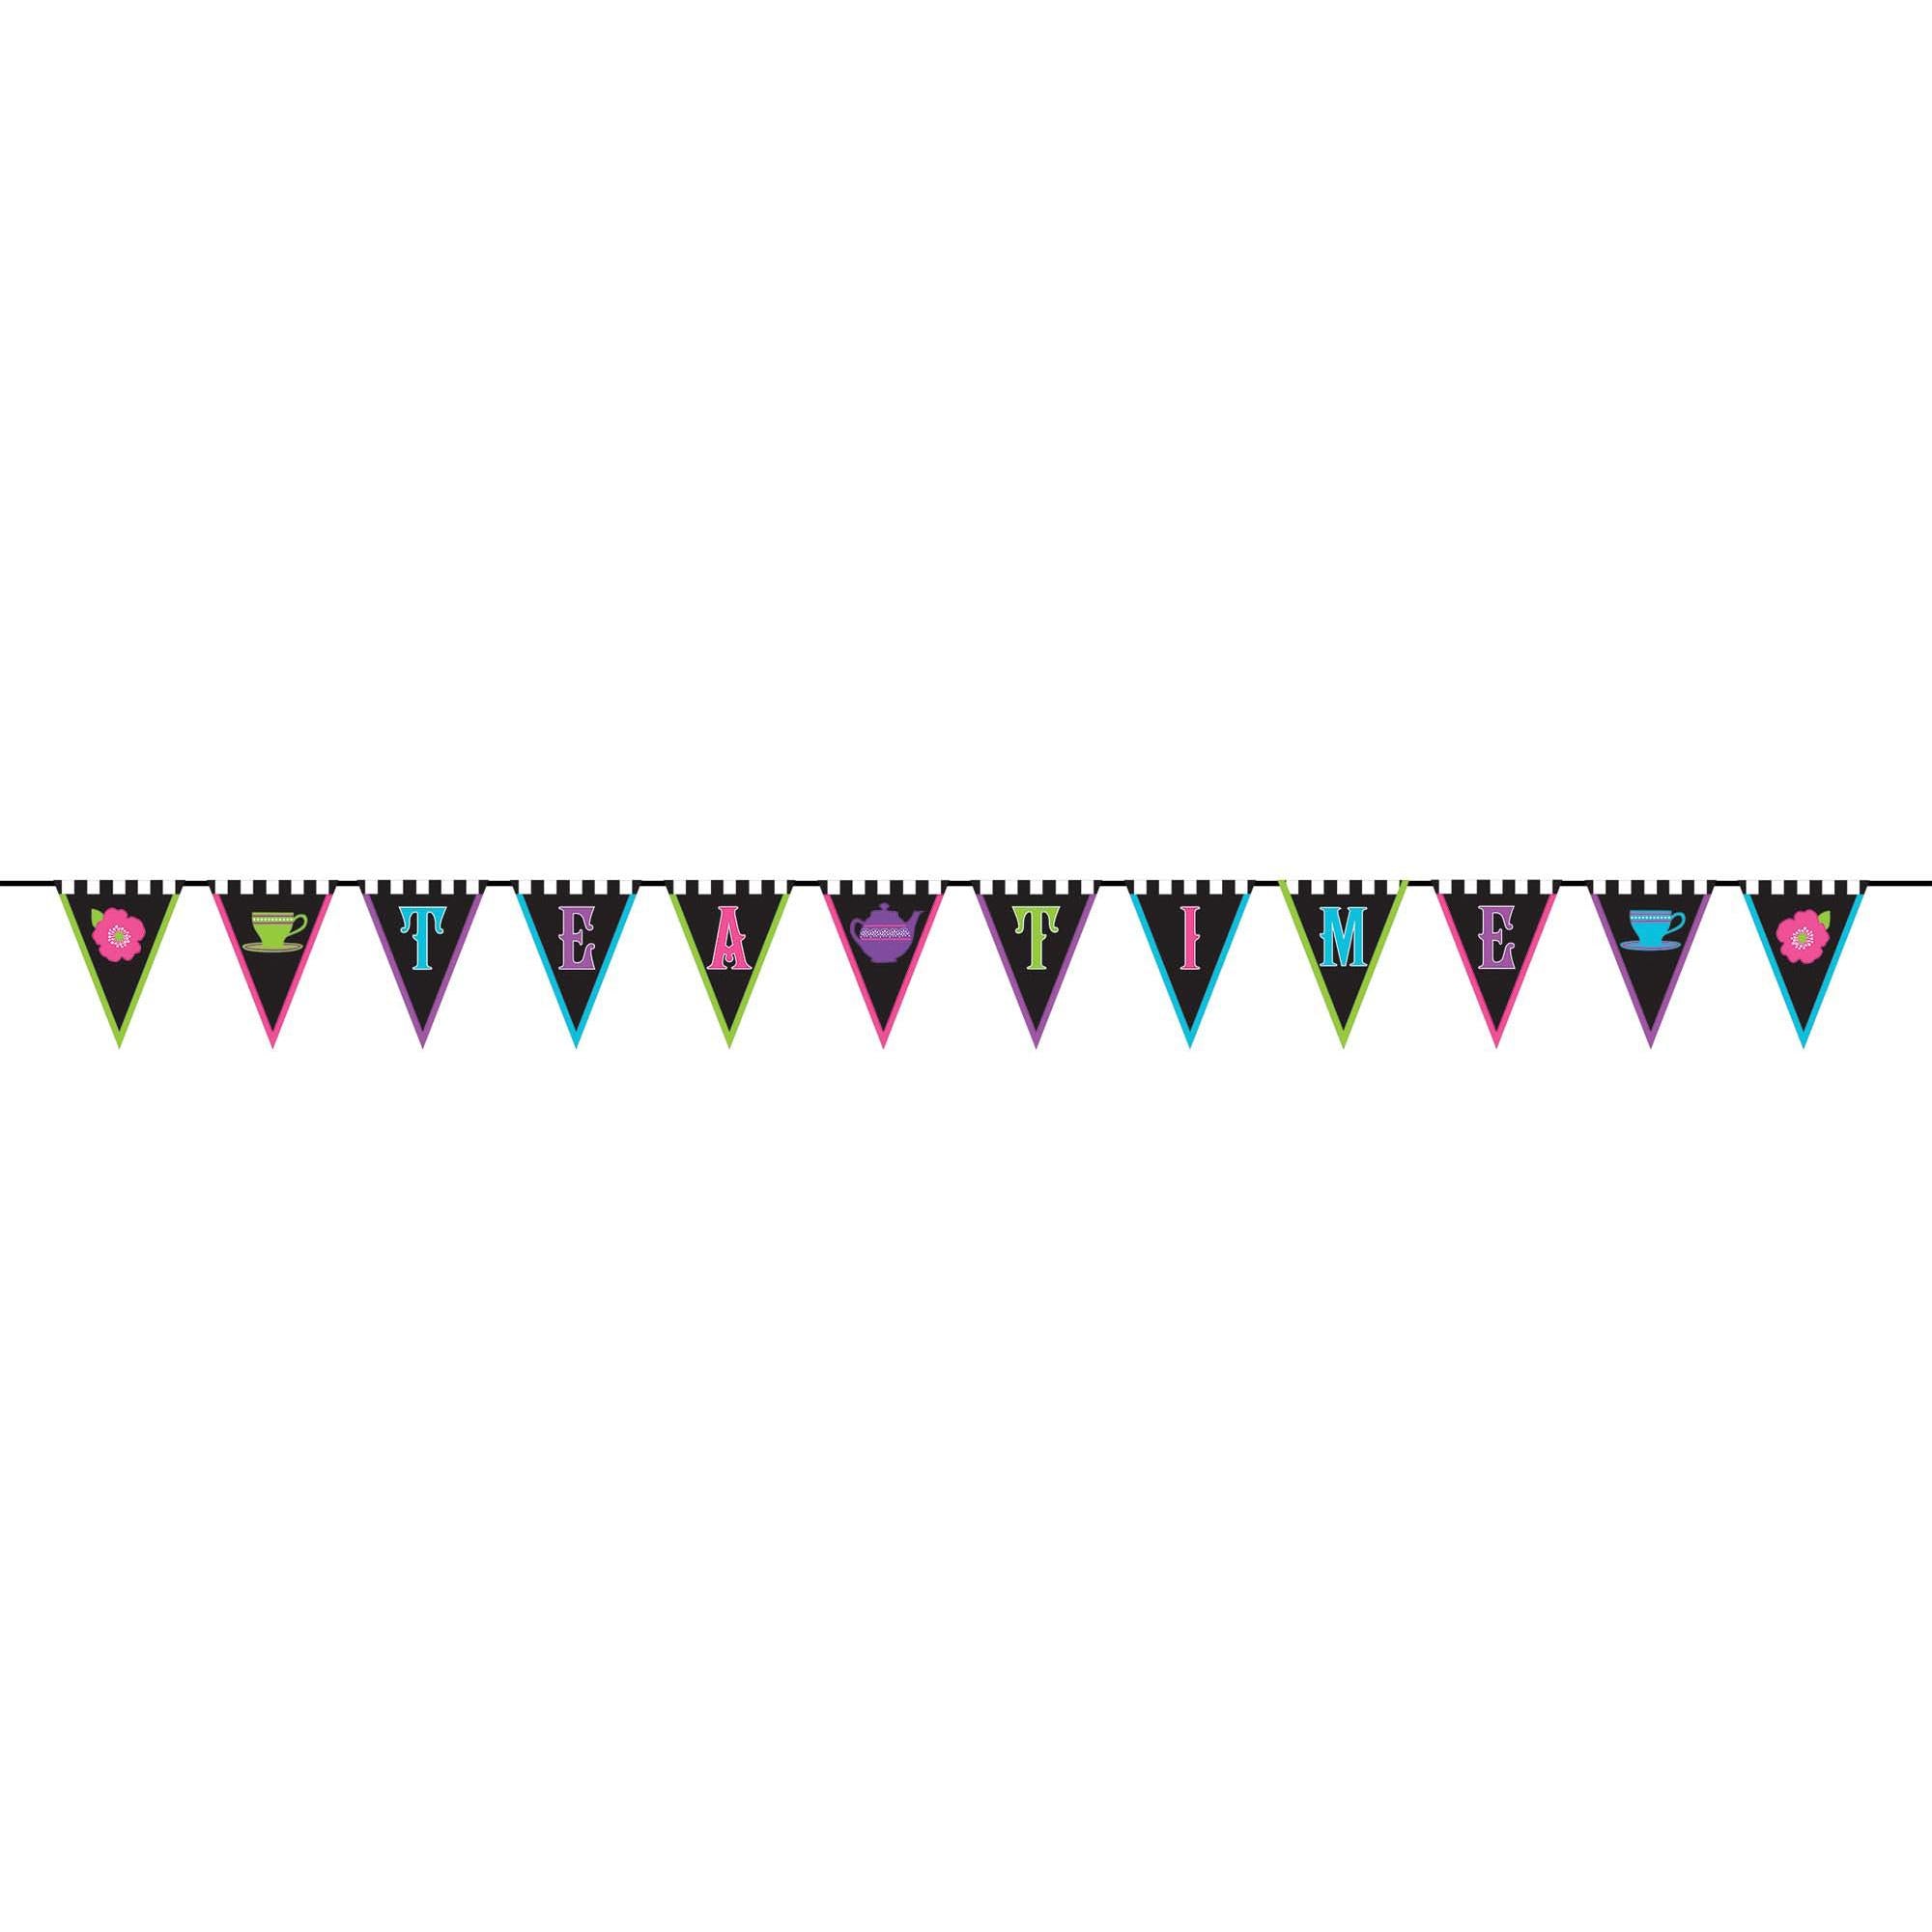 Mad Tea Party Fabric Pennant Banner Decorations - Party Centre